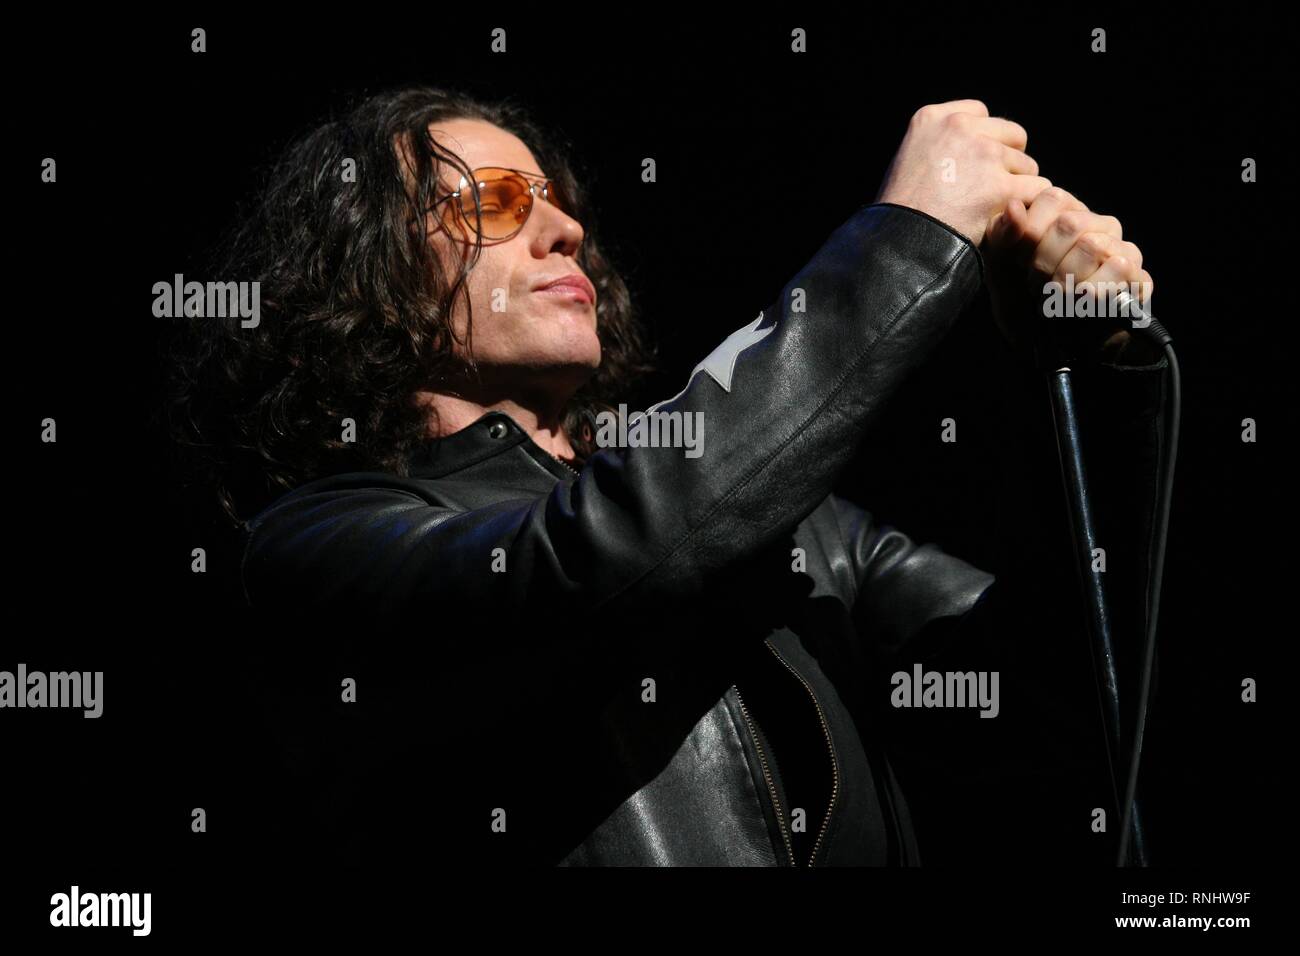 Singer Ian Astbury of The Doors is shown performing on stage during a 'live' concert appearance. Stock Photo